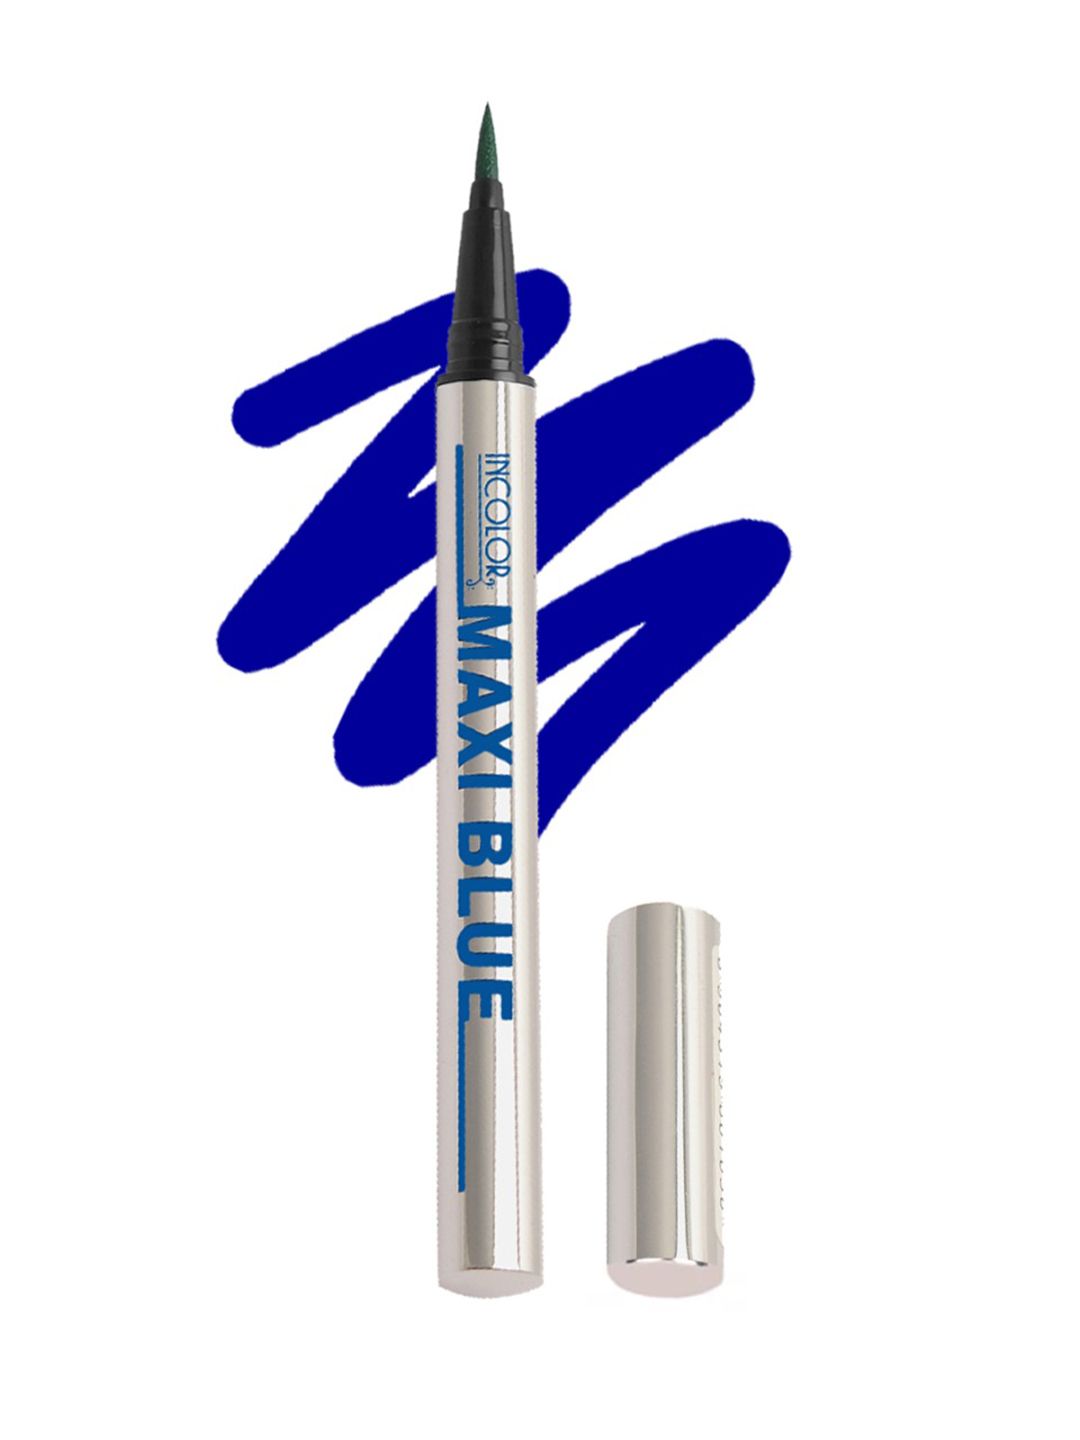 INCOLOR Maxi Pen Eyeliner - Blue 2 gm Price in India